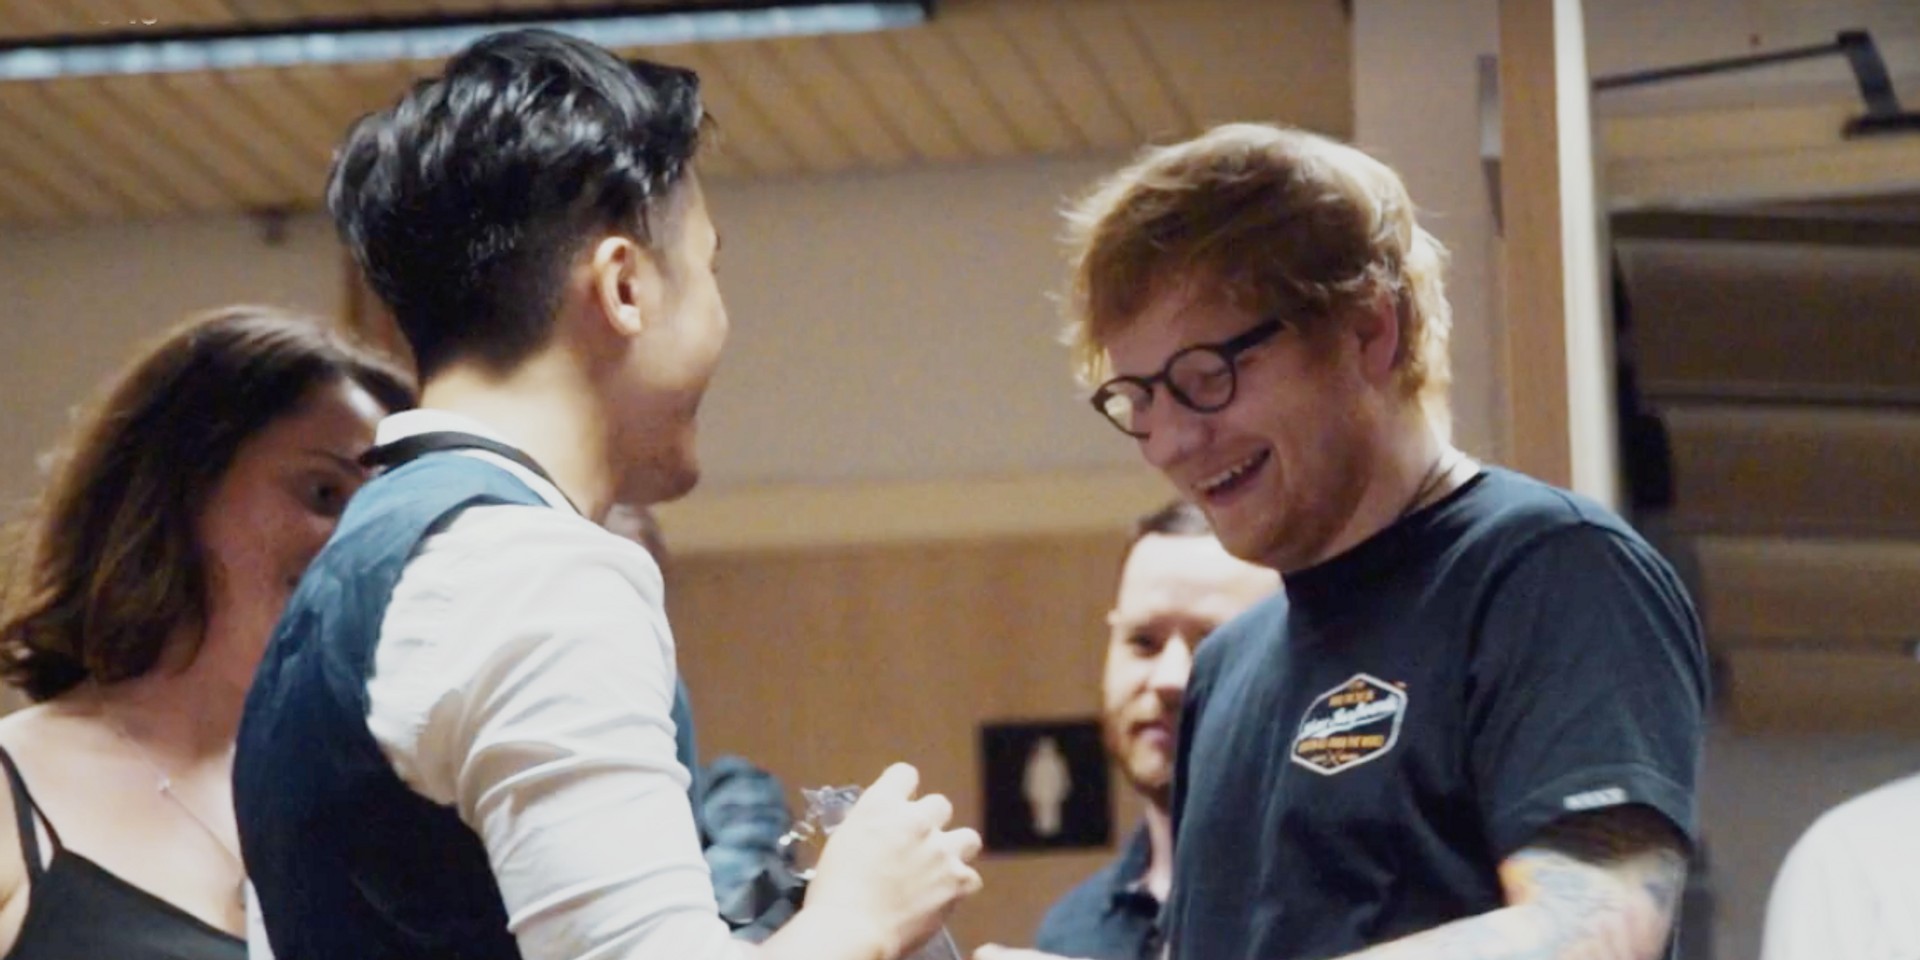 WATCH: Hirzi attempts to find Ed Sheeran in hopes of a collaboration in Sydney